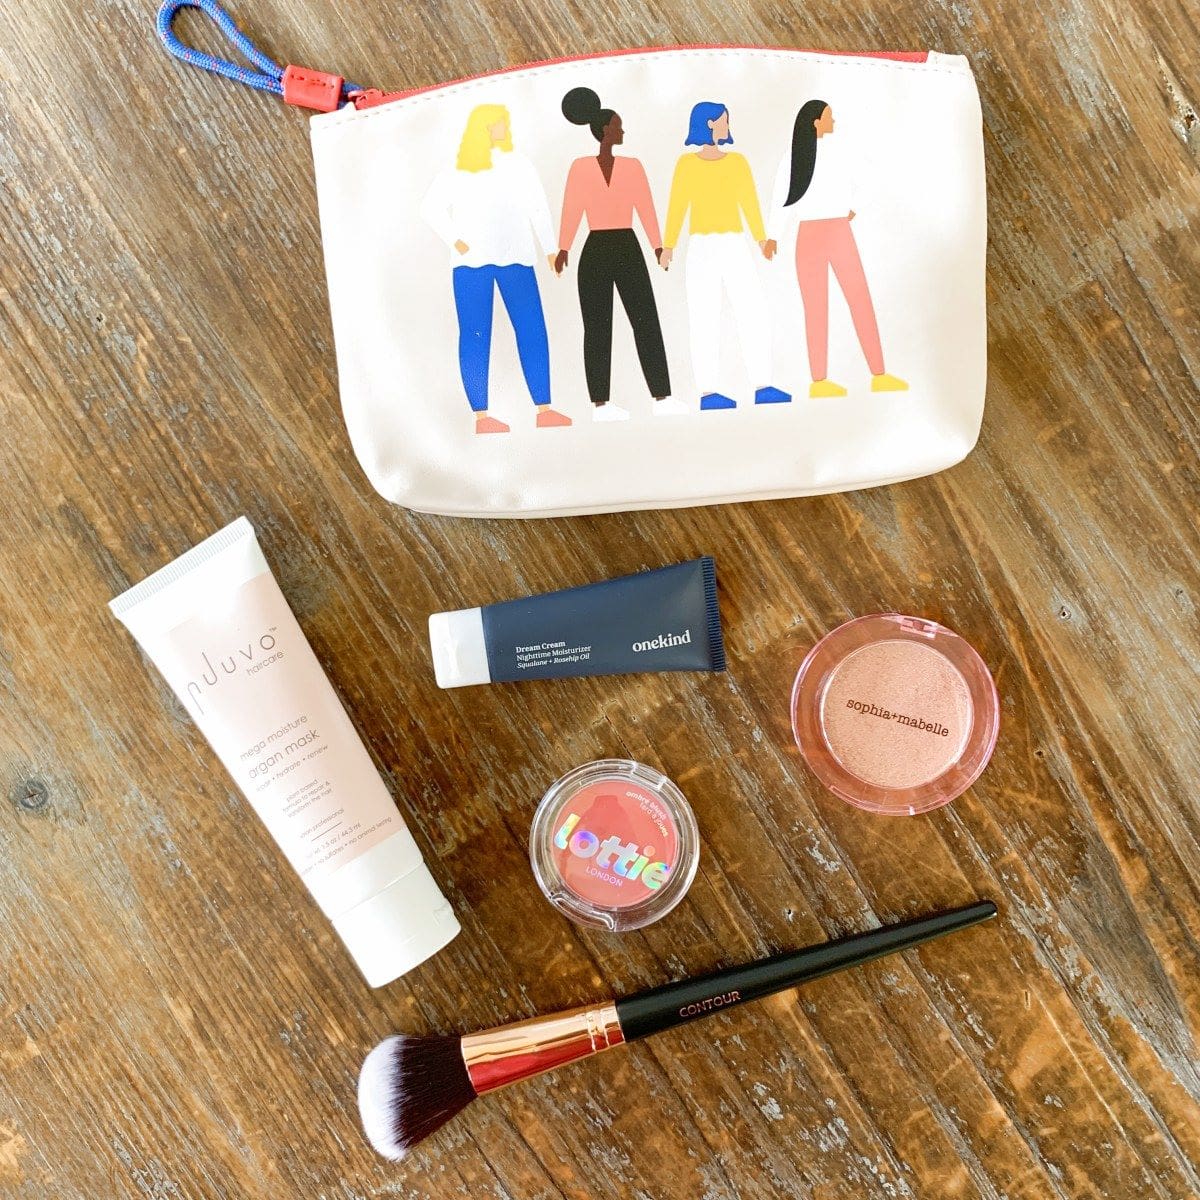 ipsy glam bag plus march 2021 Online Sale